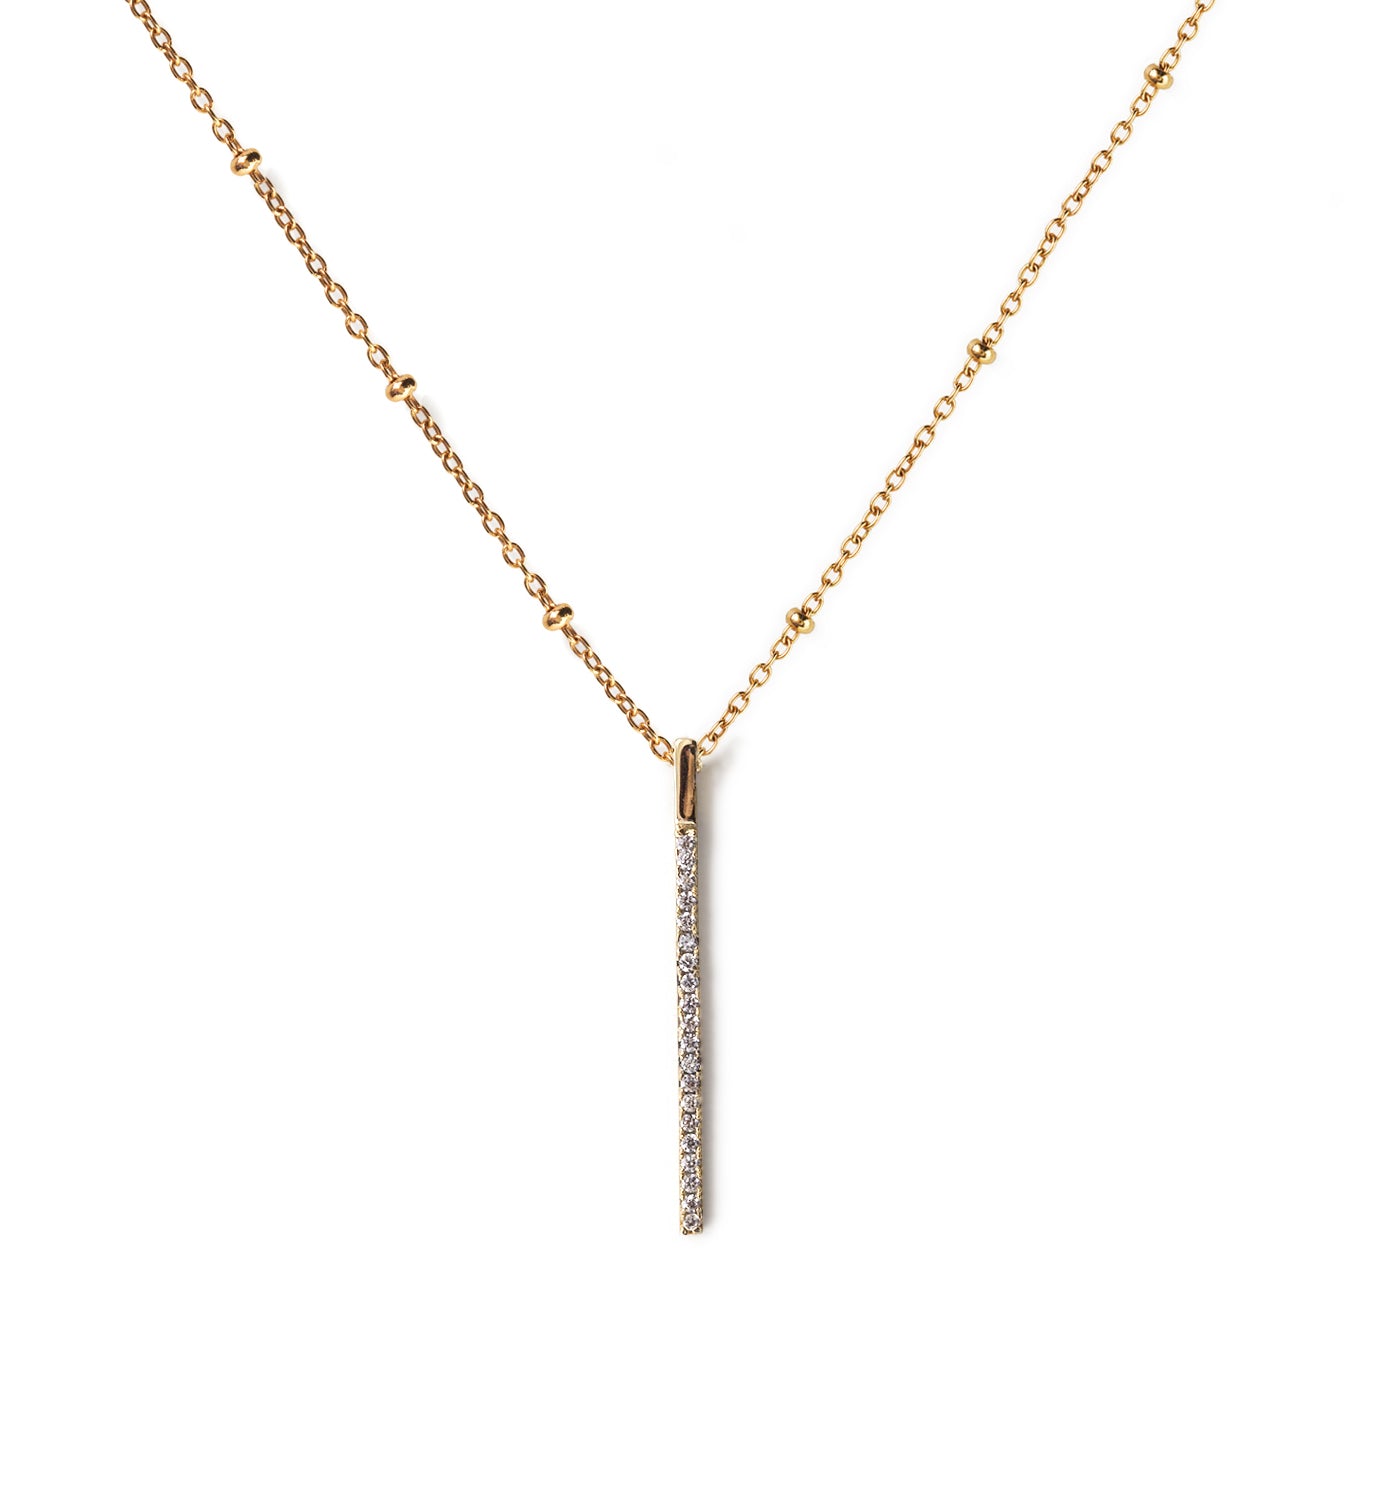 Gold Bar Beaded Chain Necklace, Necklaces - AMY O. Jewelry